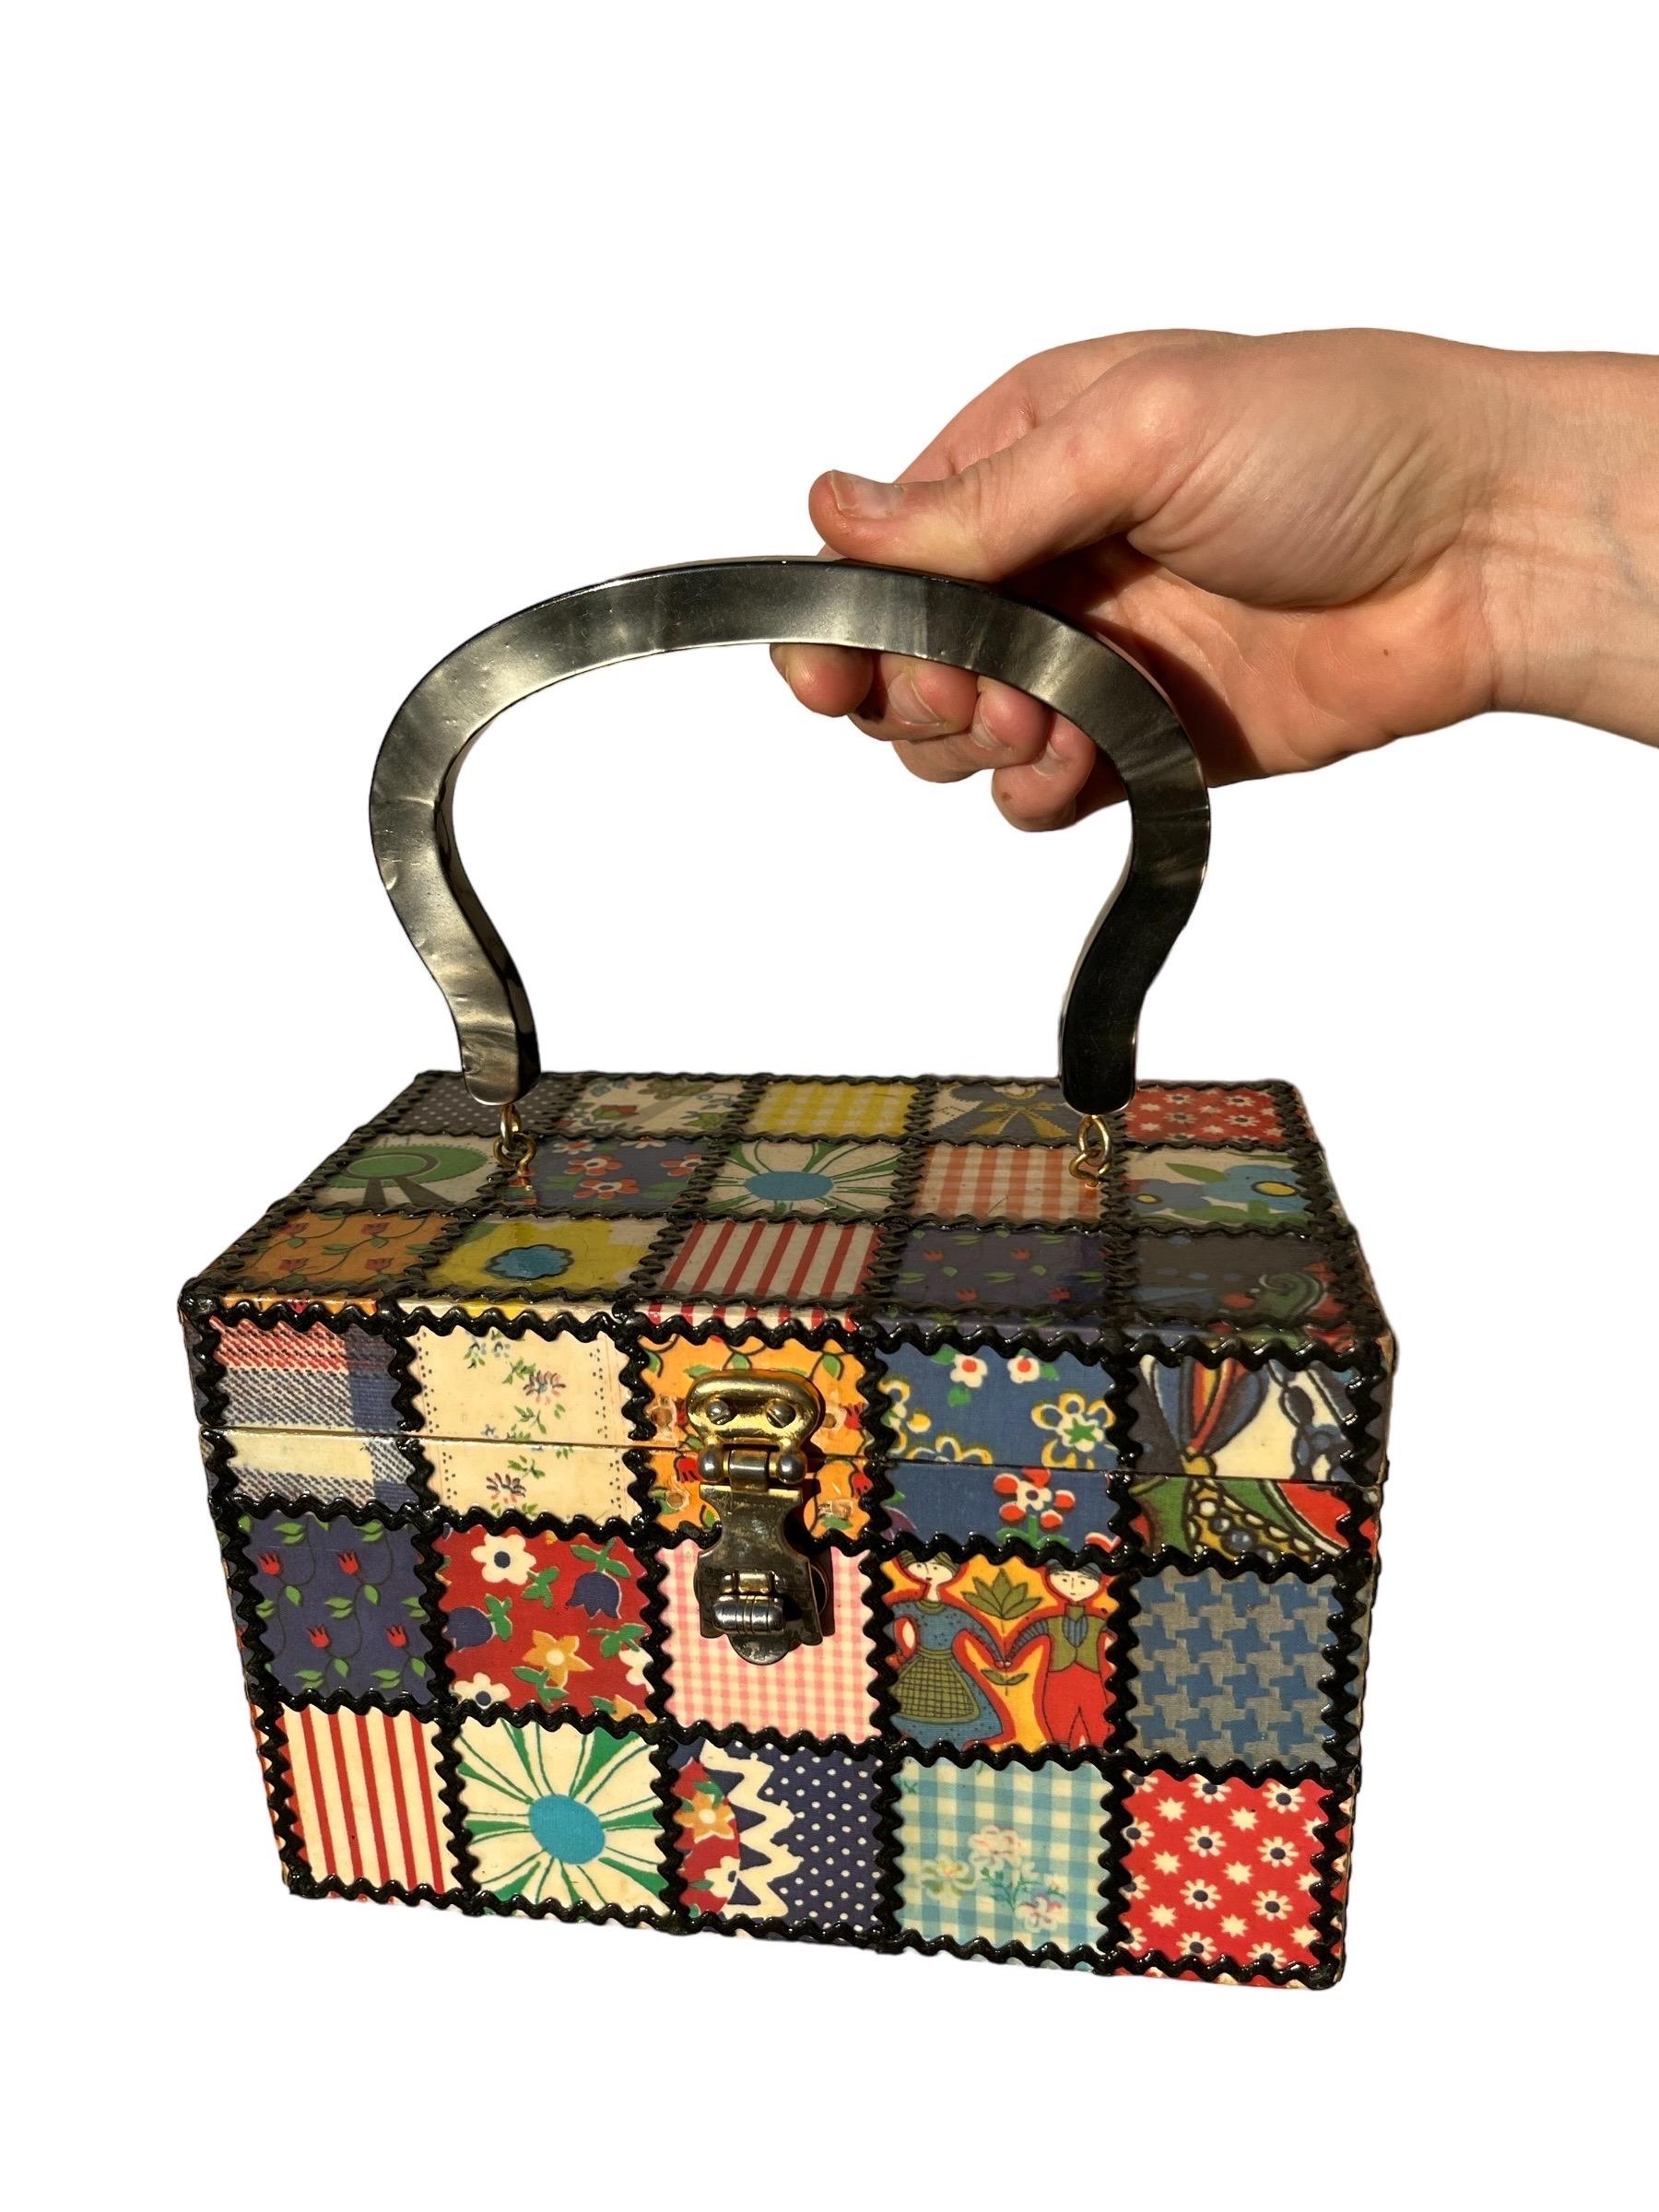 1960s Box Purse Patchwork Decoupage w/ Lucite

Amazing hand-collaged 1960s patch-work box purse is decoupaged in varying 60s-70s patterns. Each square is trimmed with ric-rac. It has a gorgeous silvery-gray marbled lucite handle, metal clasp &